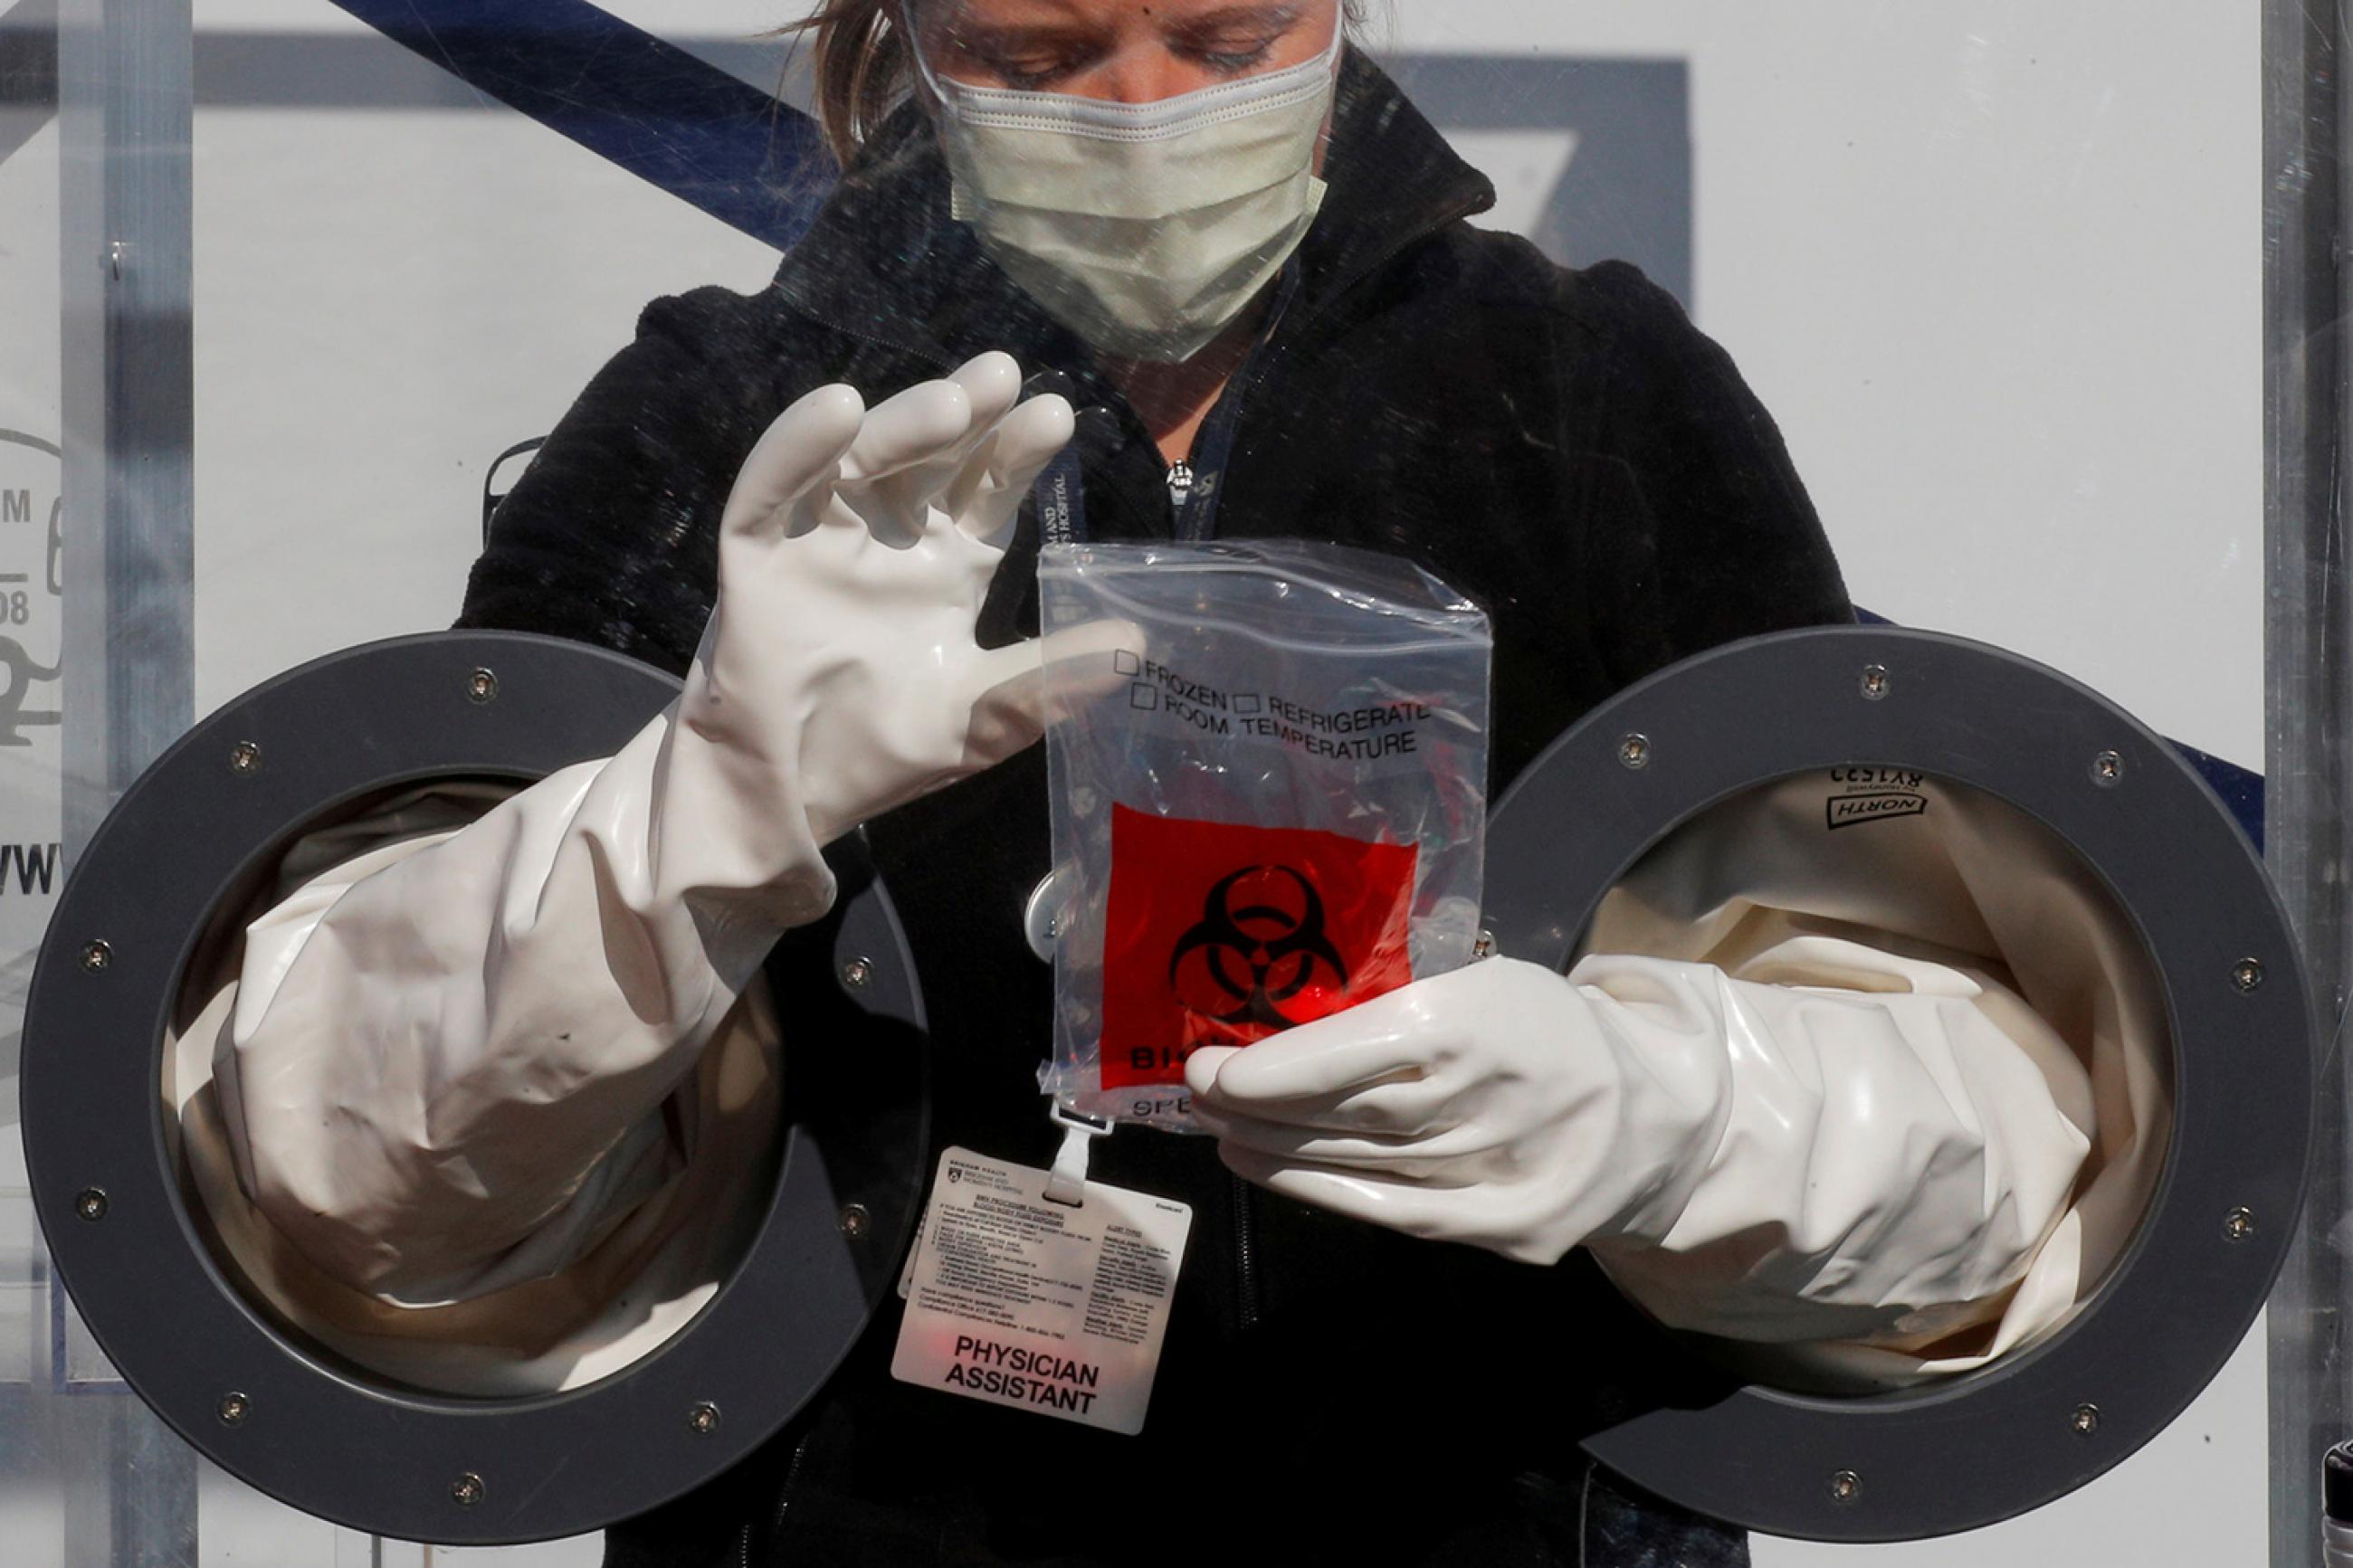 Physician Assistant Cori Kostick demonstrates a booth used to administer tests for coronavirus at the Brigham and Women Hospital in Boston, Massachusetts, on May 5, 2020. The photo shows the worker behind a protective barrier with incorporated gloves, allowing her to work with patients on the other side. REUTERS/Brian Snyder